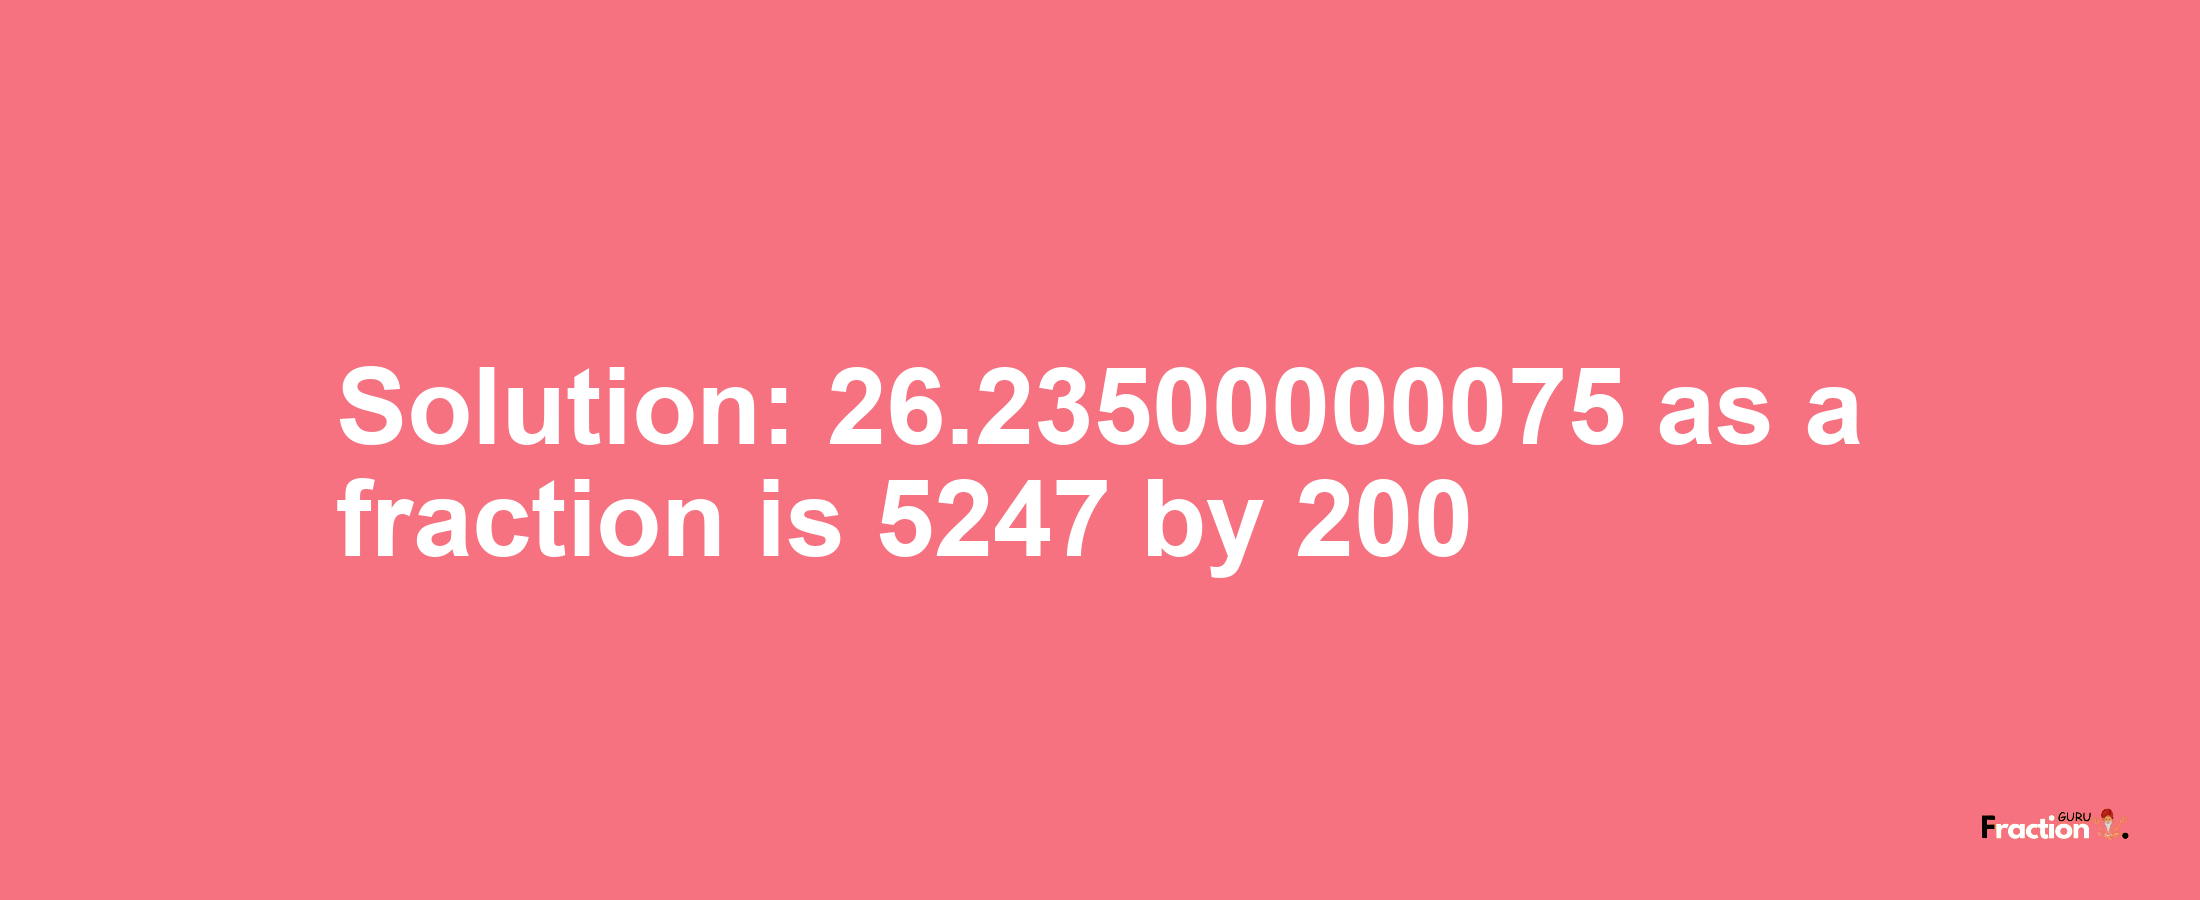 Solution:26.23500000075 as a fraction is 5247/200